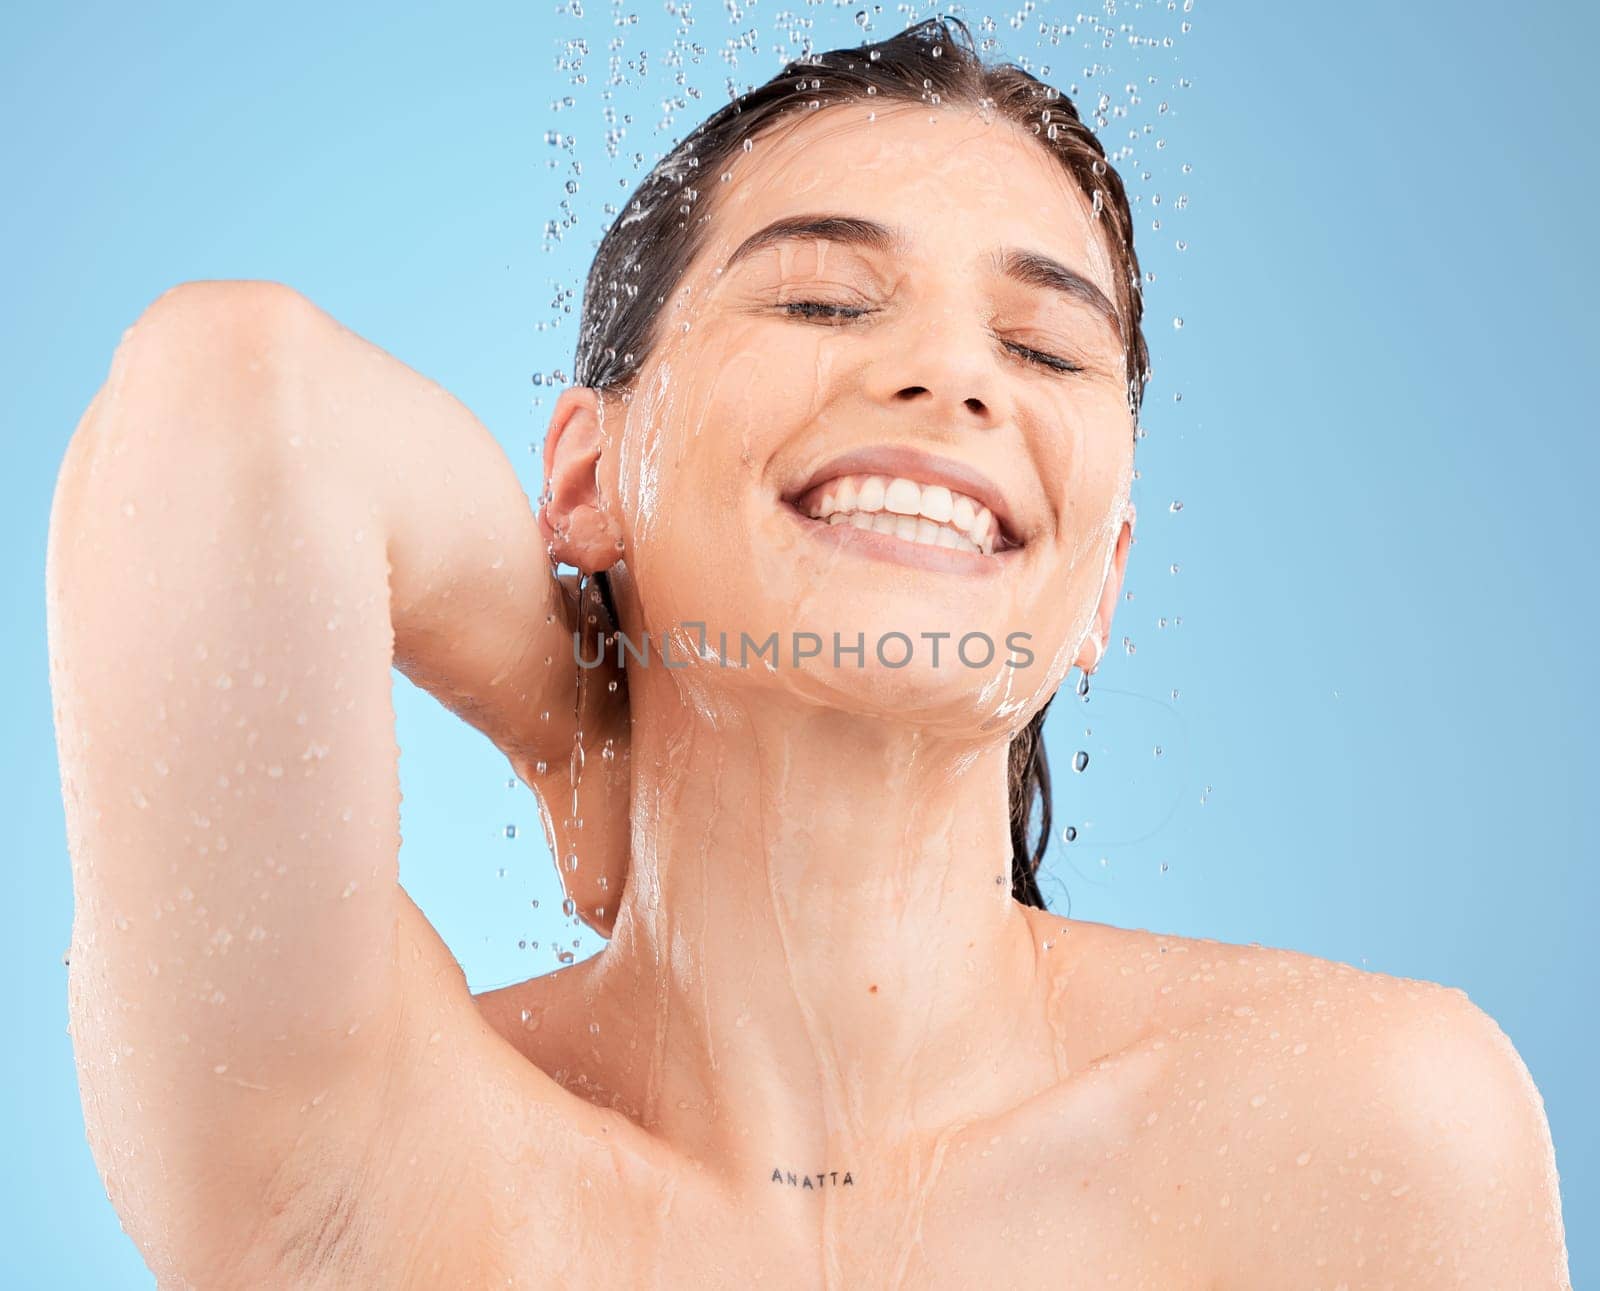 Water, skincare and beauty with woman in shower for cleaning, cosmetics and luxury. Self care, hygiene and hydration with girl model washing for health, wellness and relax in blue background studio.